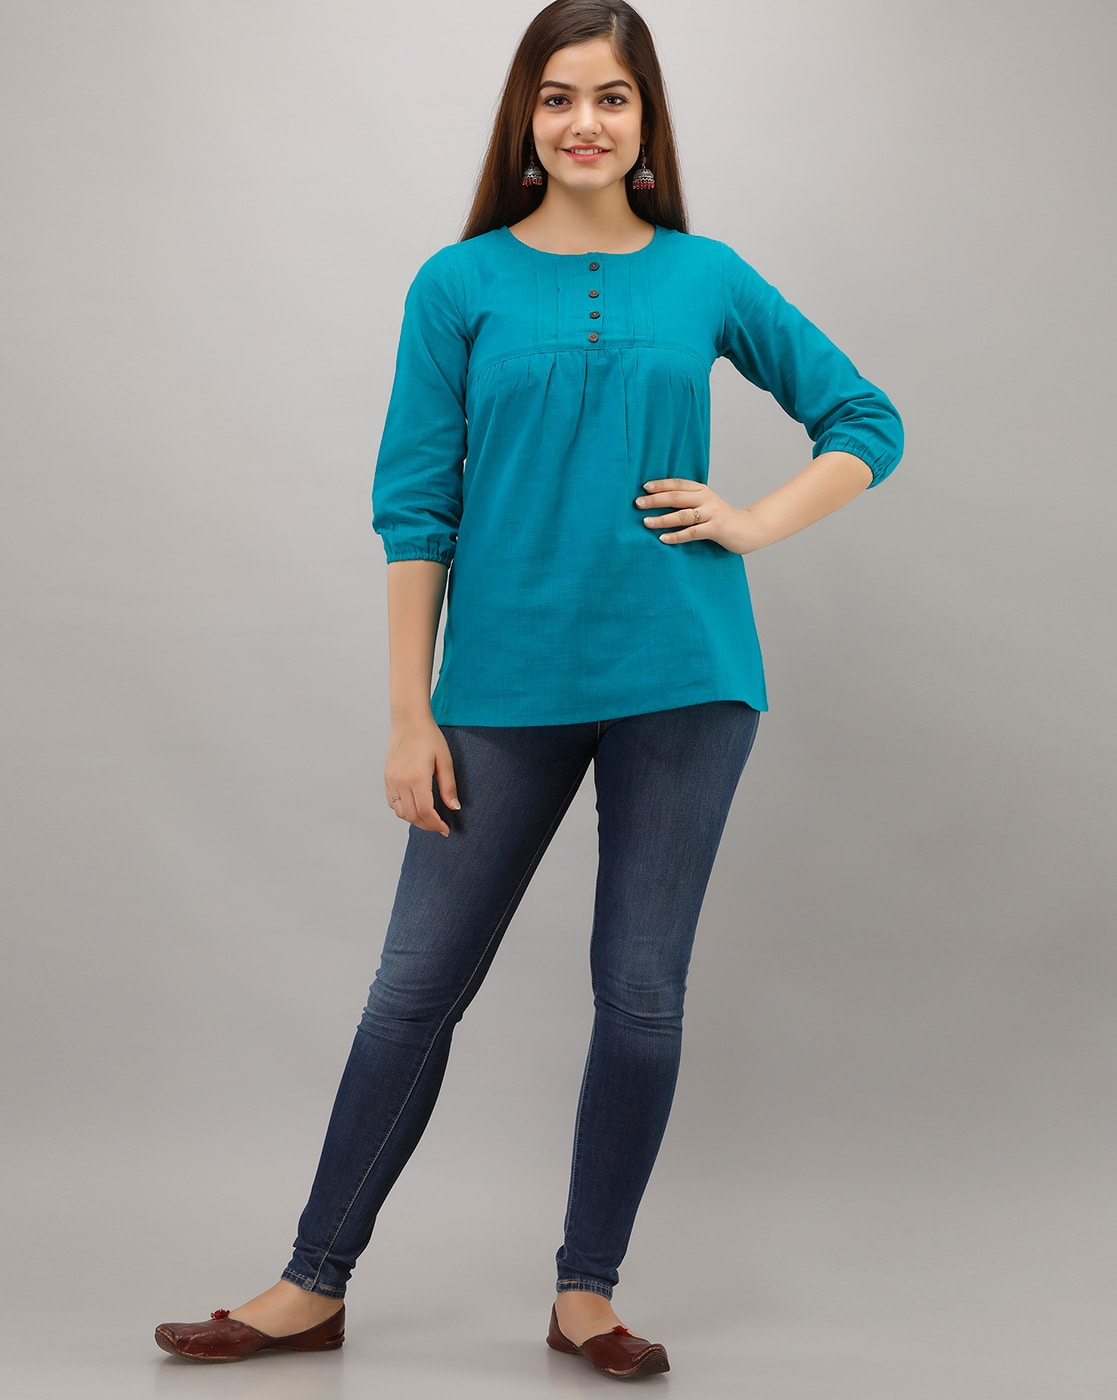 Ladies Casual Tops Buyers - Wholesale Manufacturers, Importers